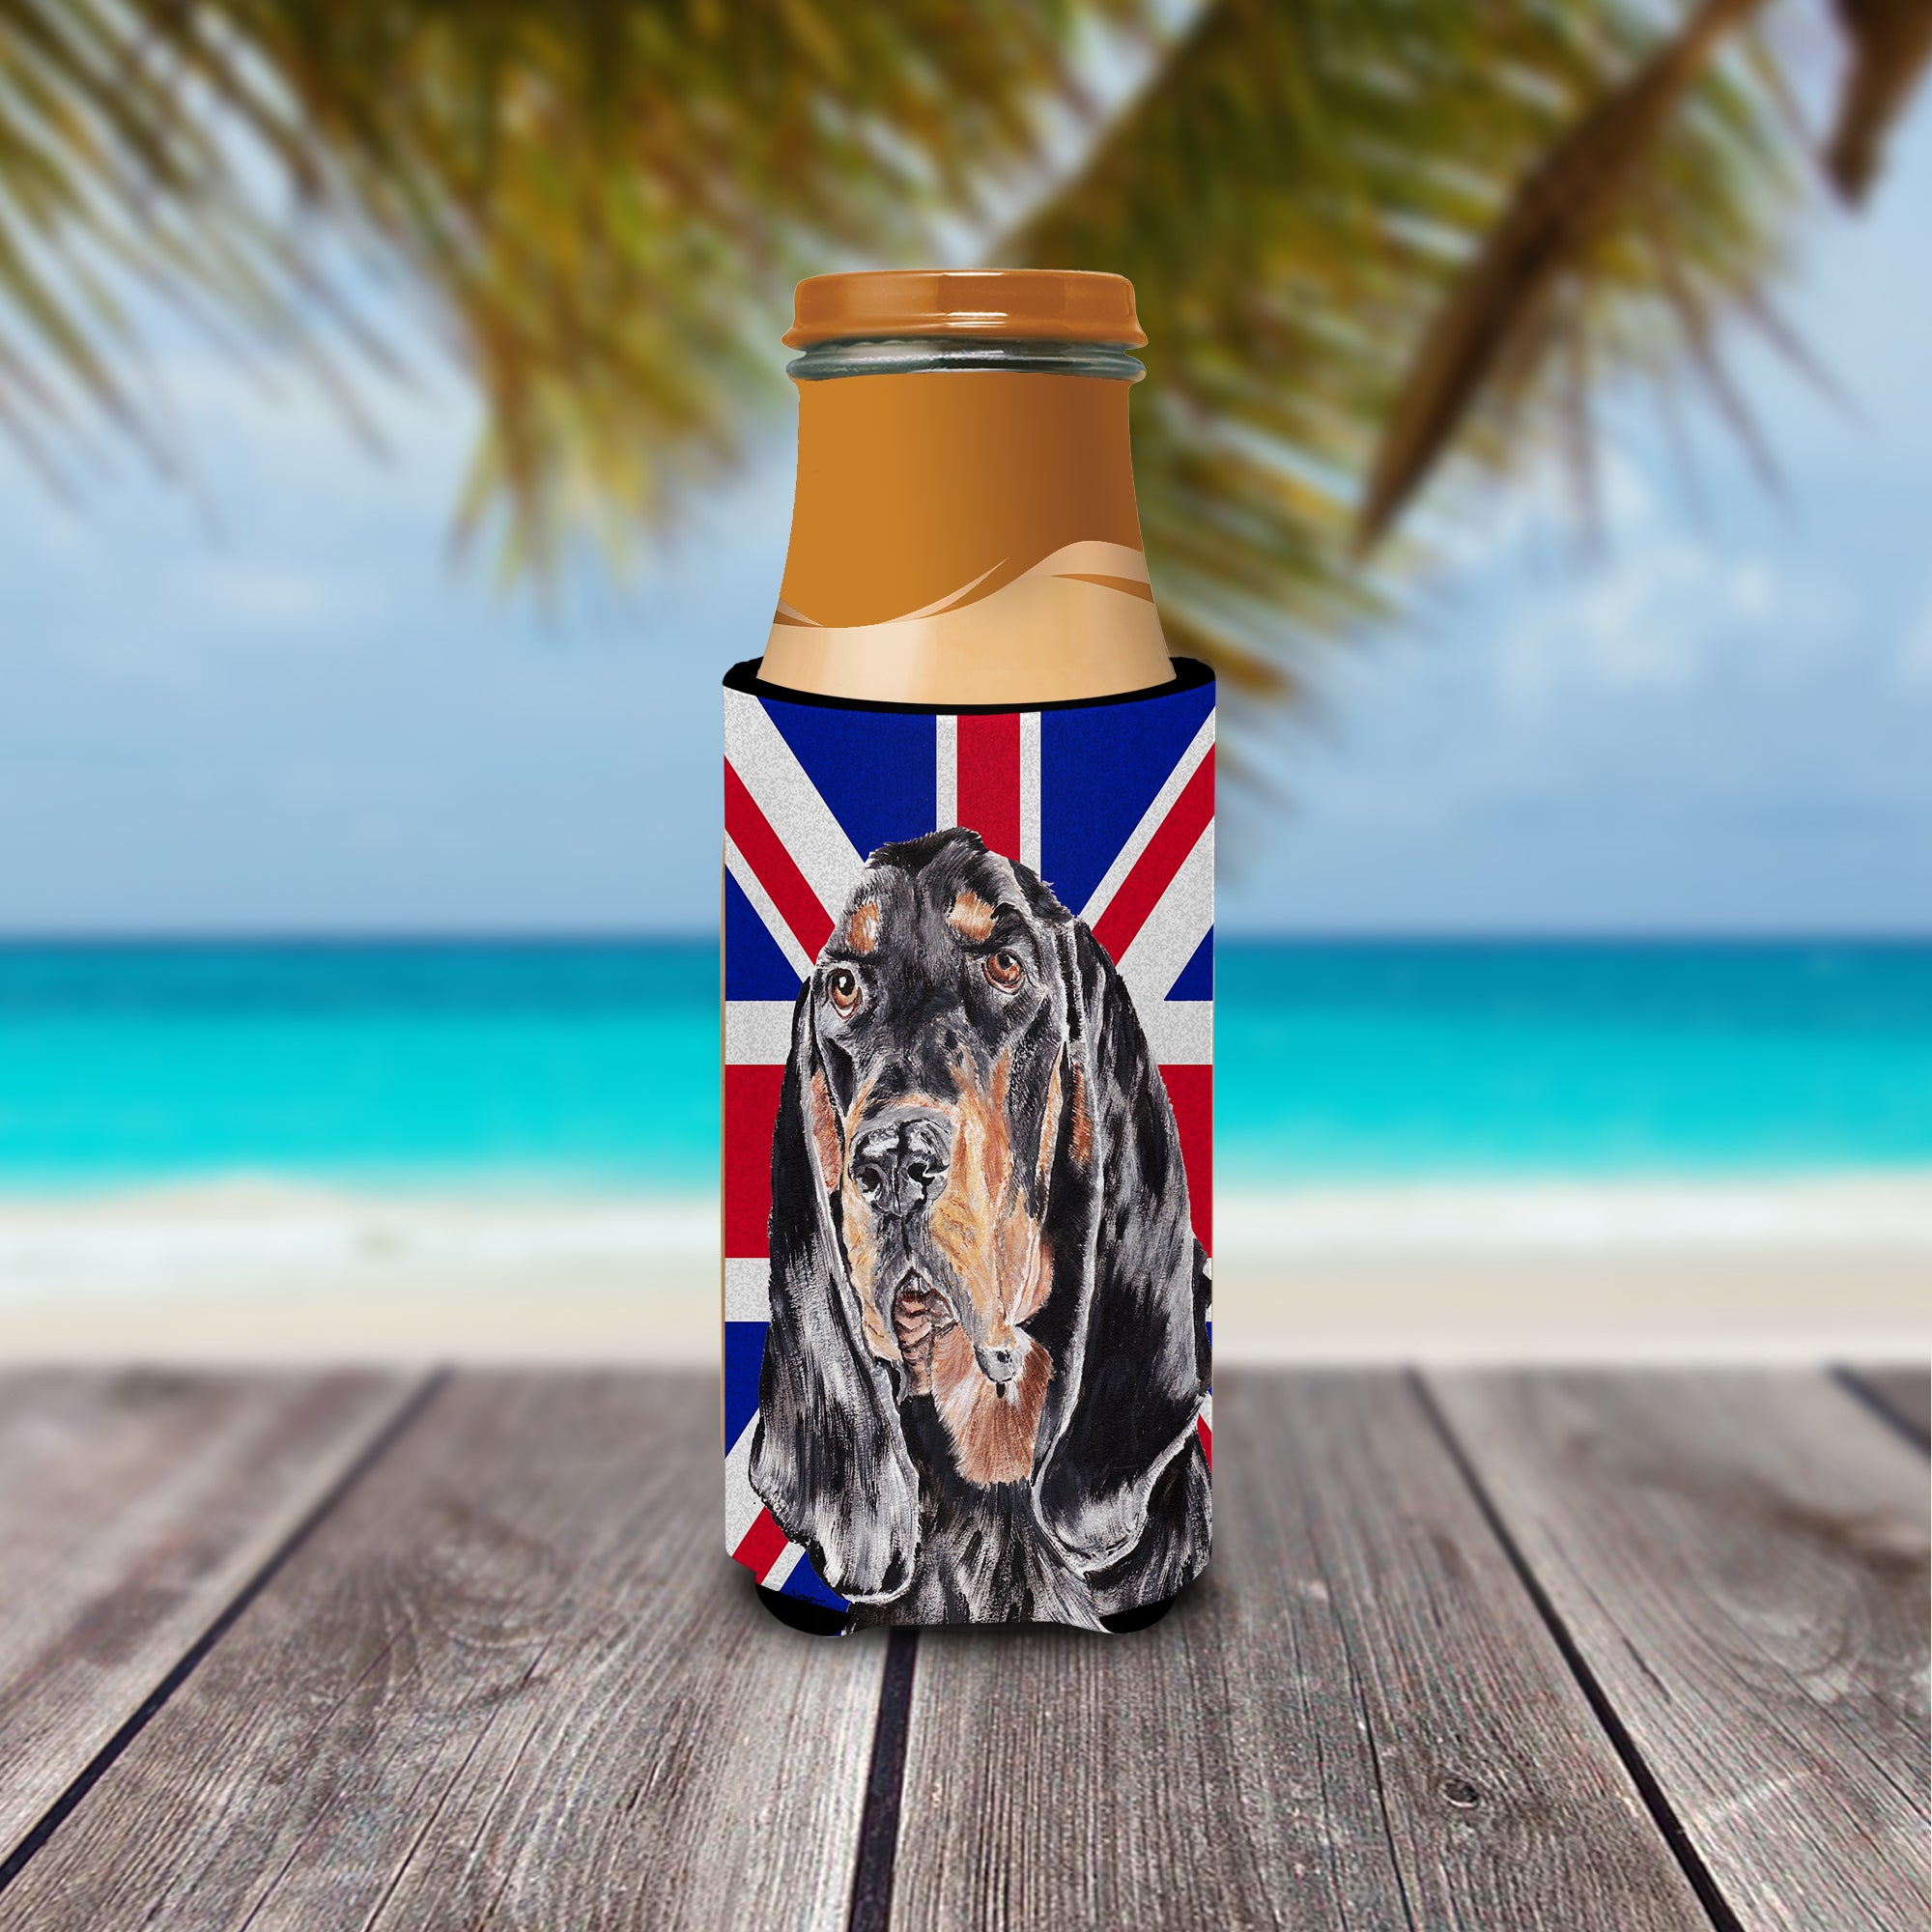 Black and Tan Coonhound with Engish Union Jack British Flag Ultra Beverage Insulators for slim cans SC9869MUK.